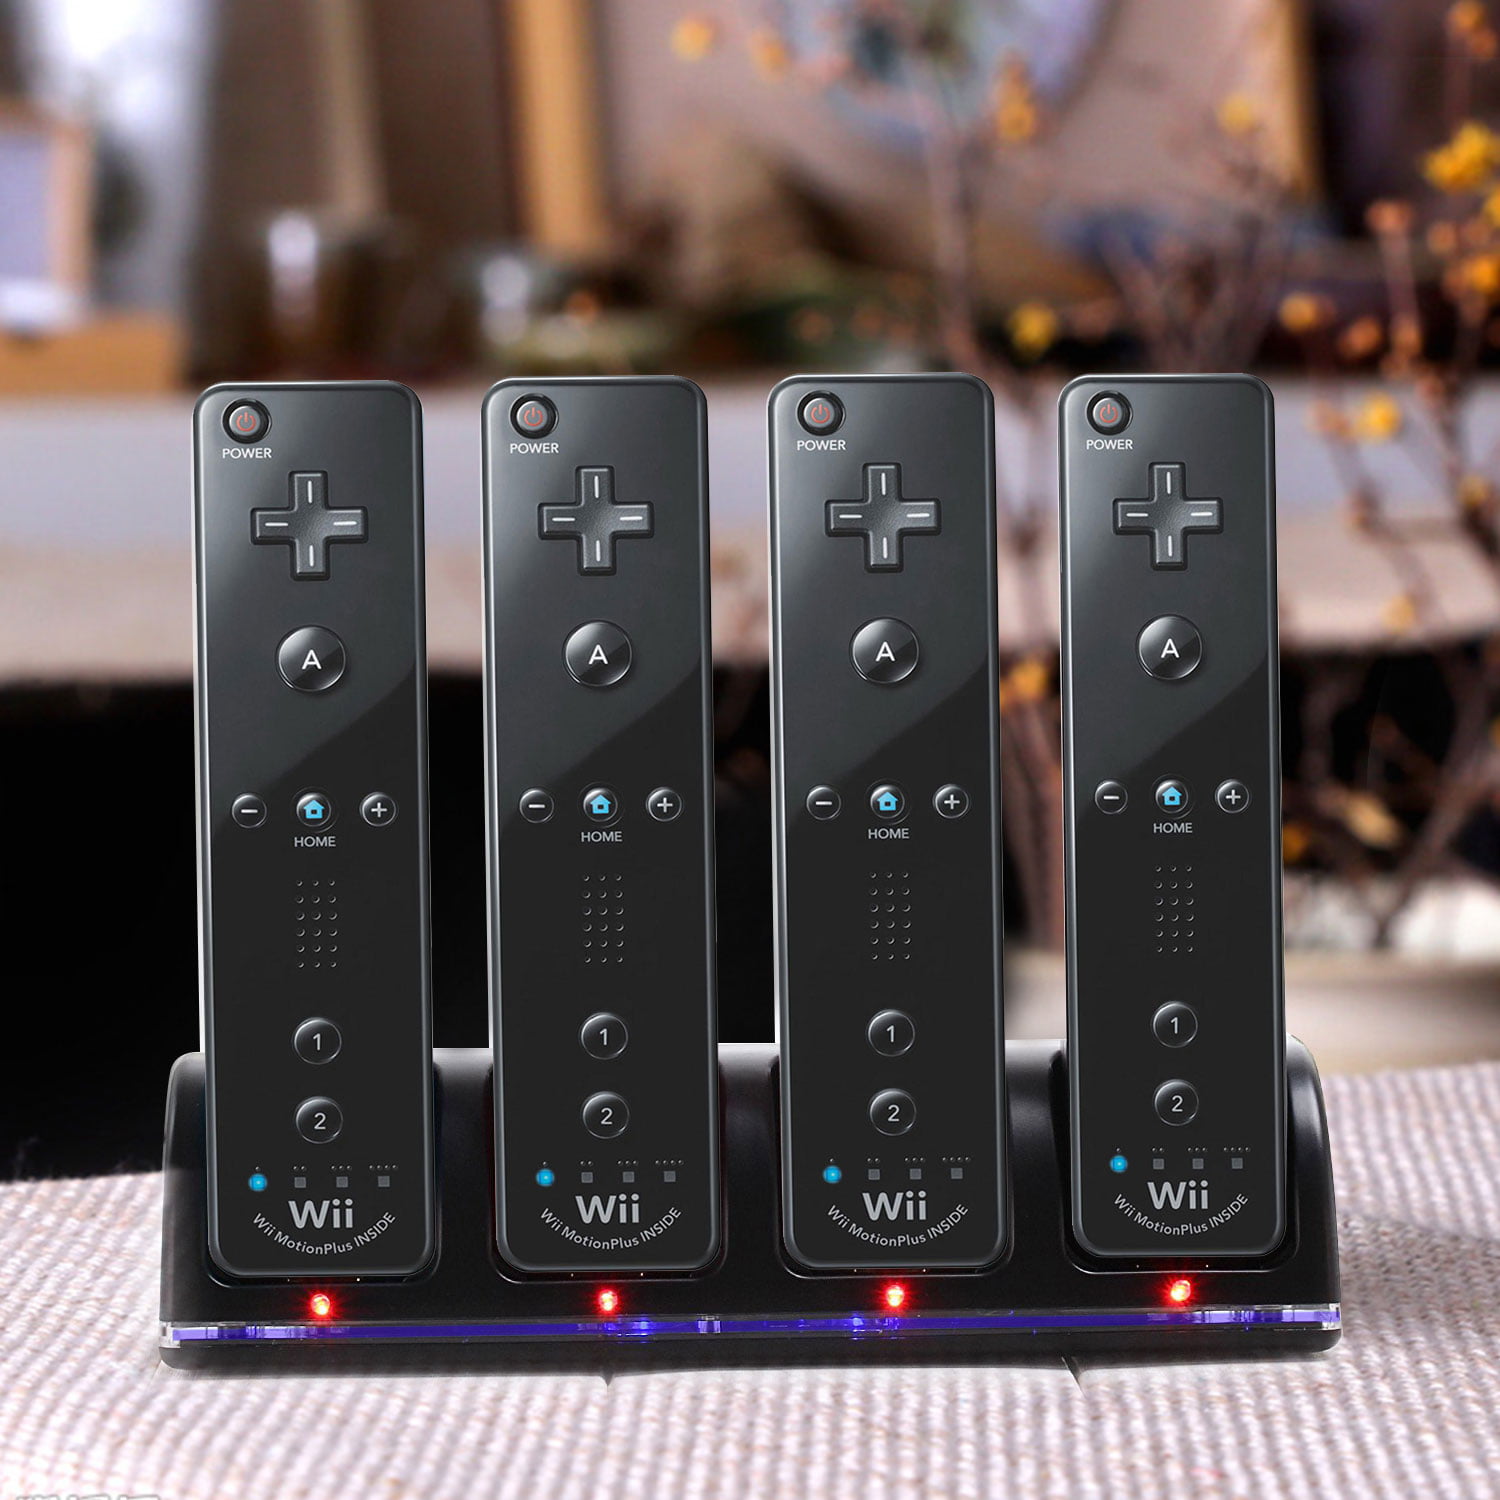 4 wii remotes